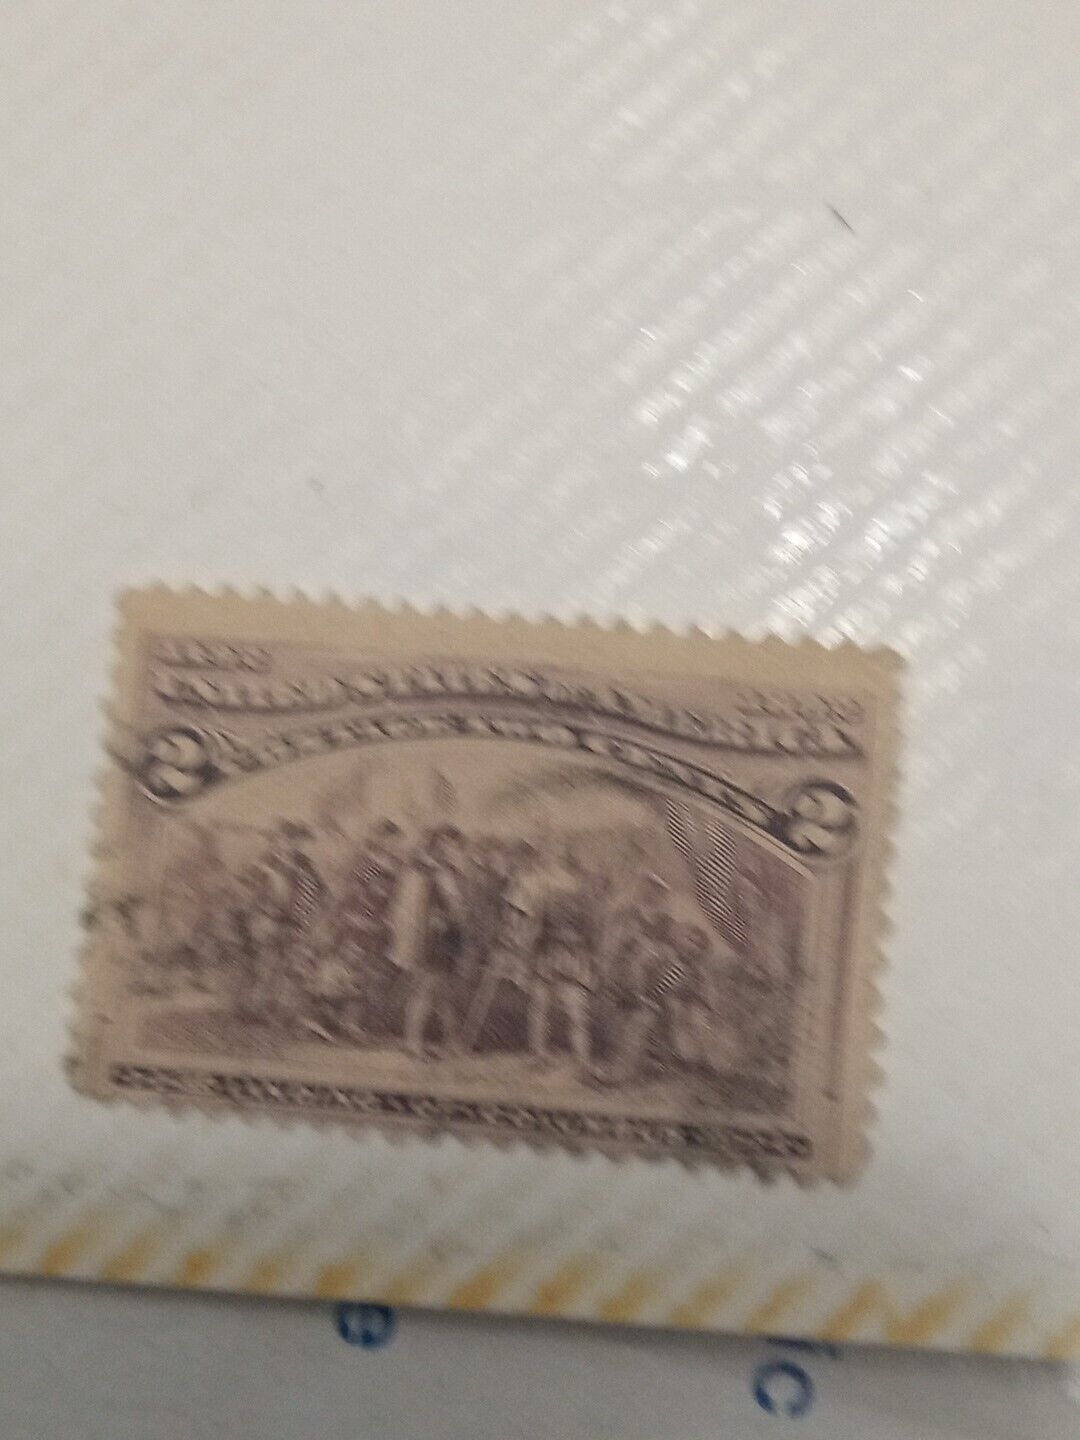 Vintage 1892 WORLD'S COLUMBIAN EXPOSITION CHICAGO Stamp 2 Cents unused 